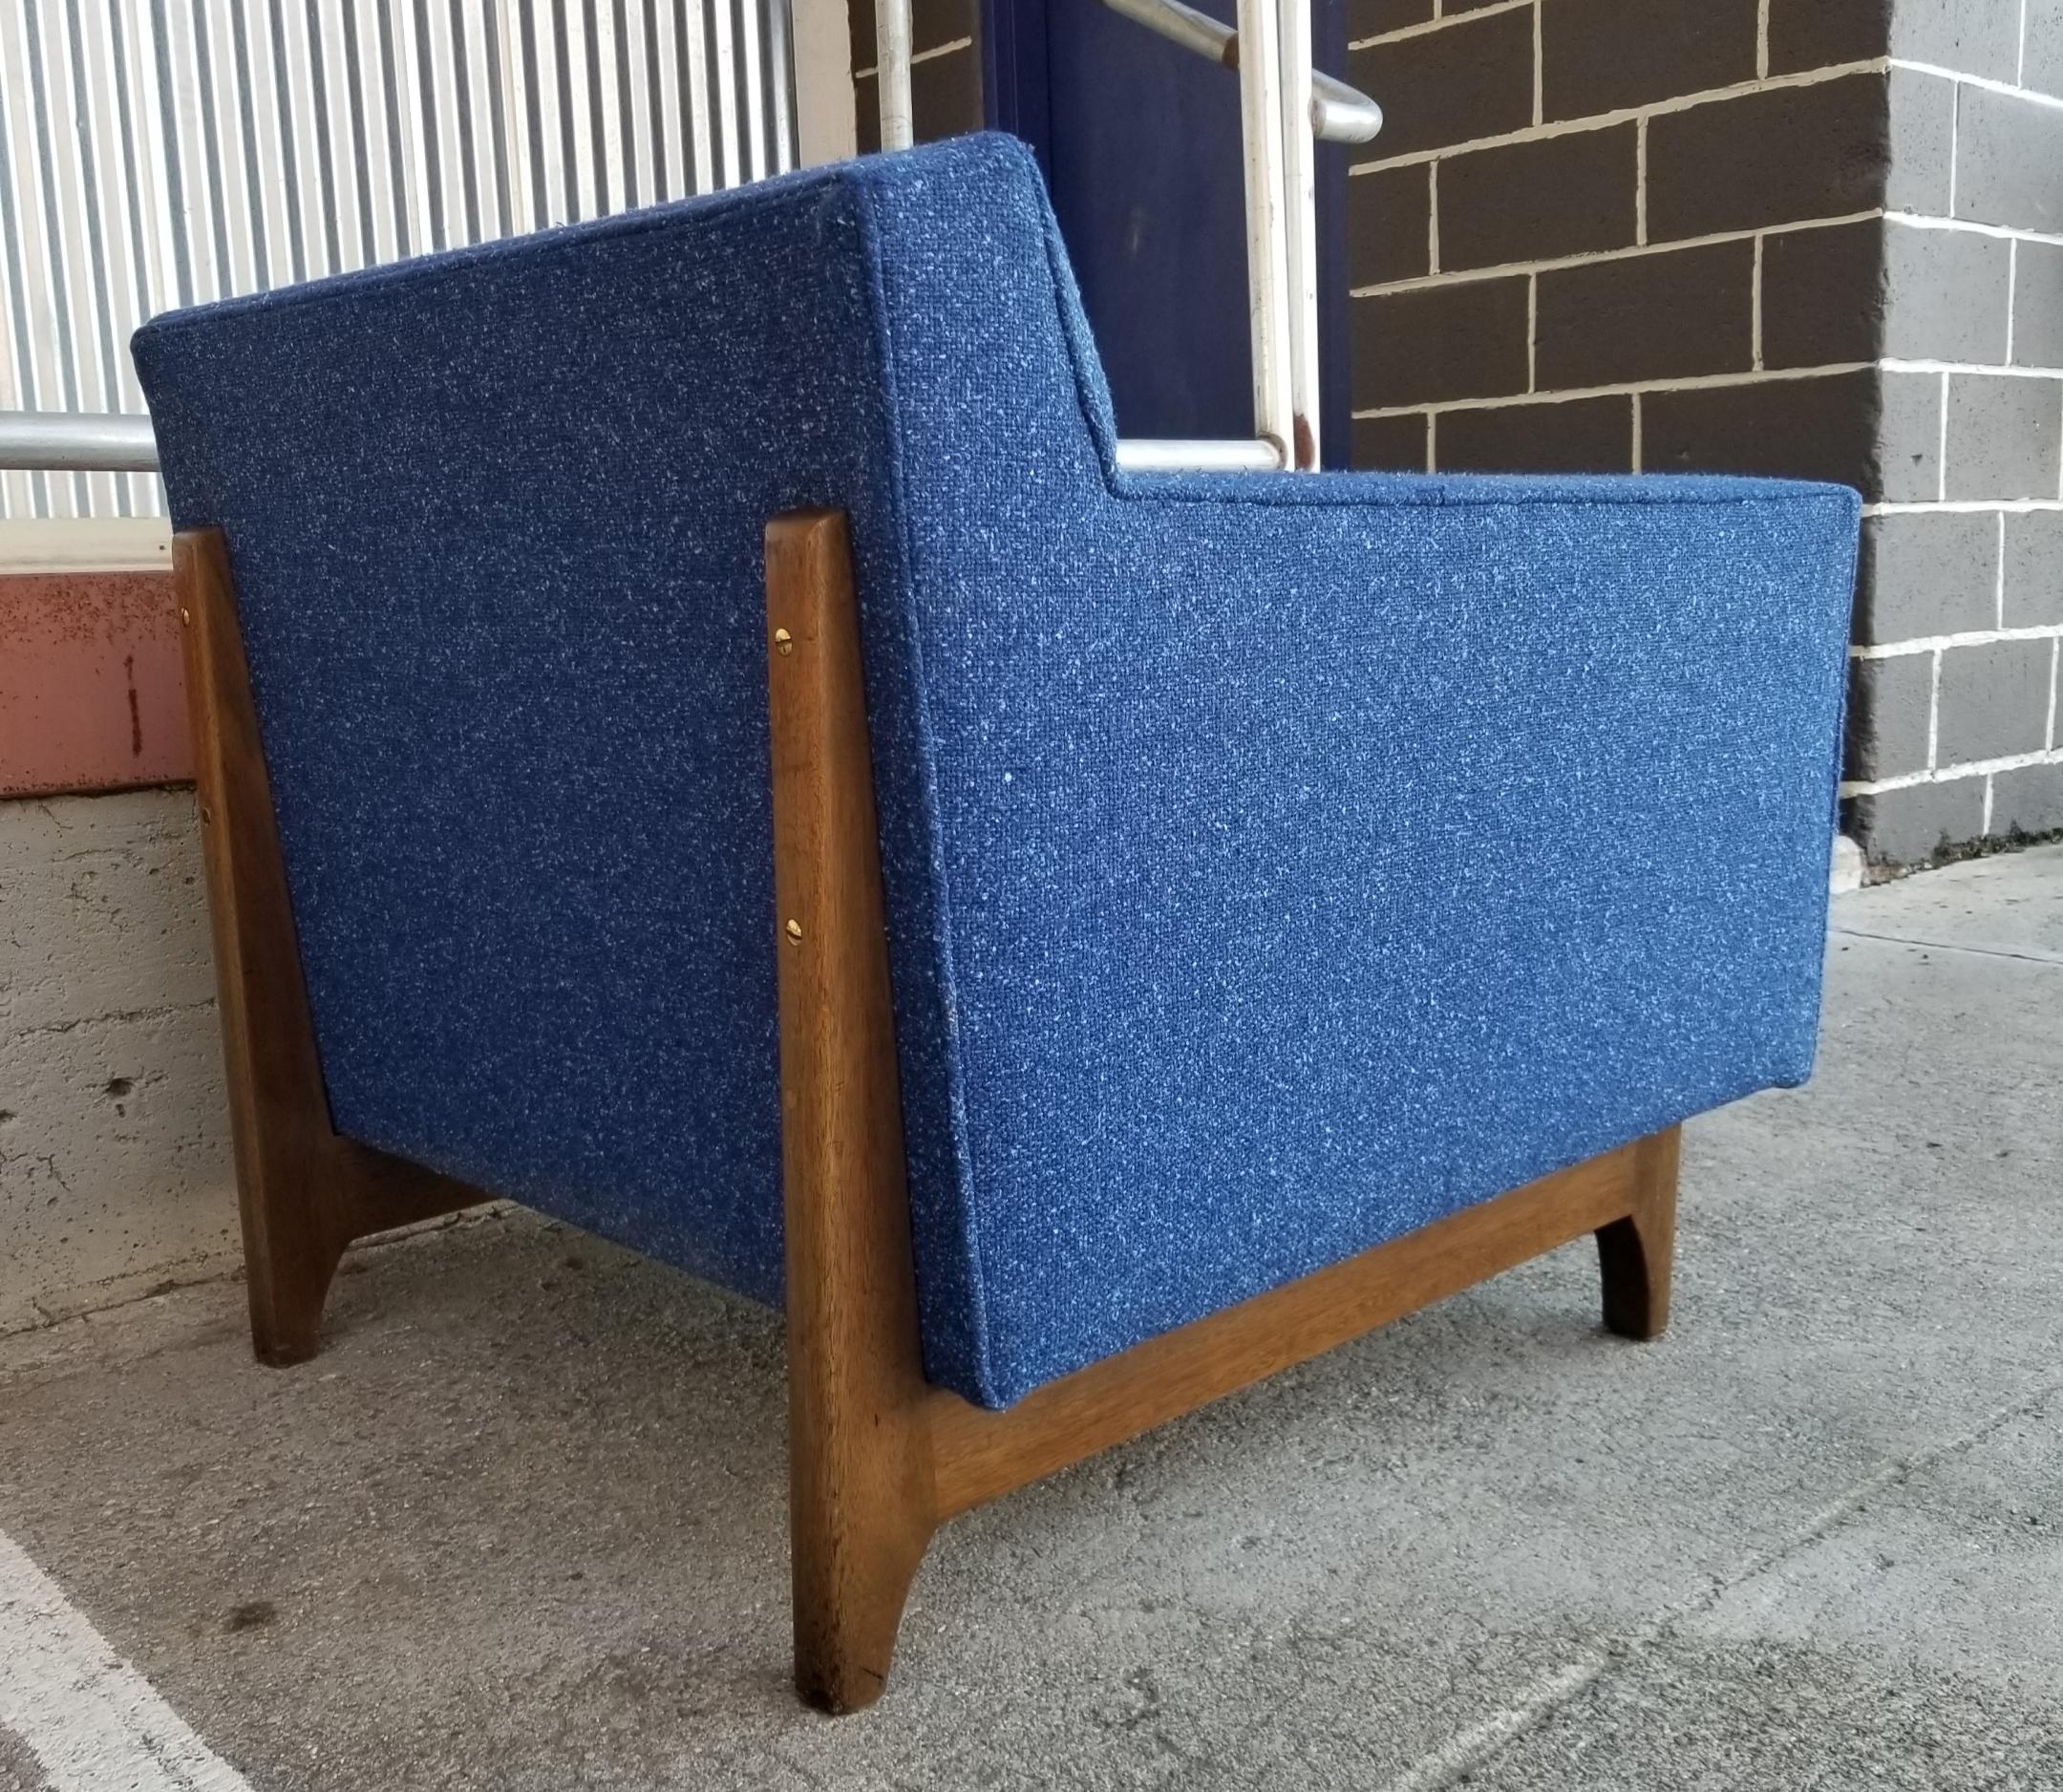 Mid-Century Modern lounge chair in the manner of Adrian Pearsall. Solid walnut exoskeleton with original electric blue upholstery. Comfortable, solid chair with sculptural frame and geometric design, circa 1960s. Arm height measures: 22.5 inches.